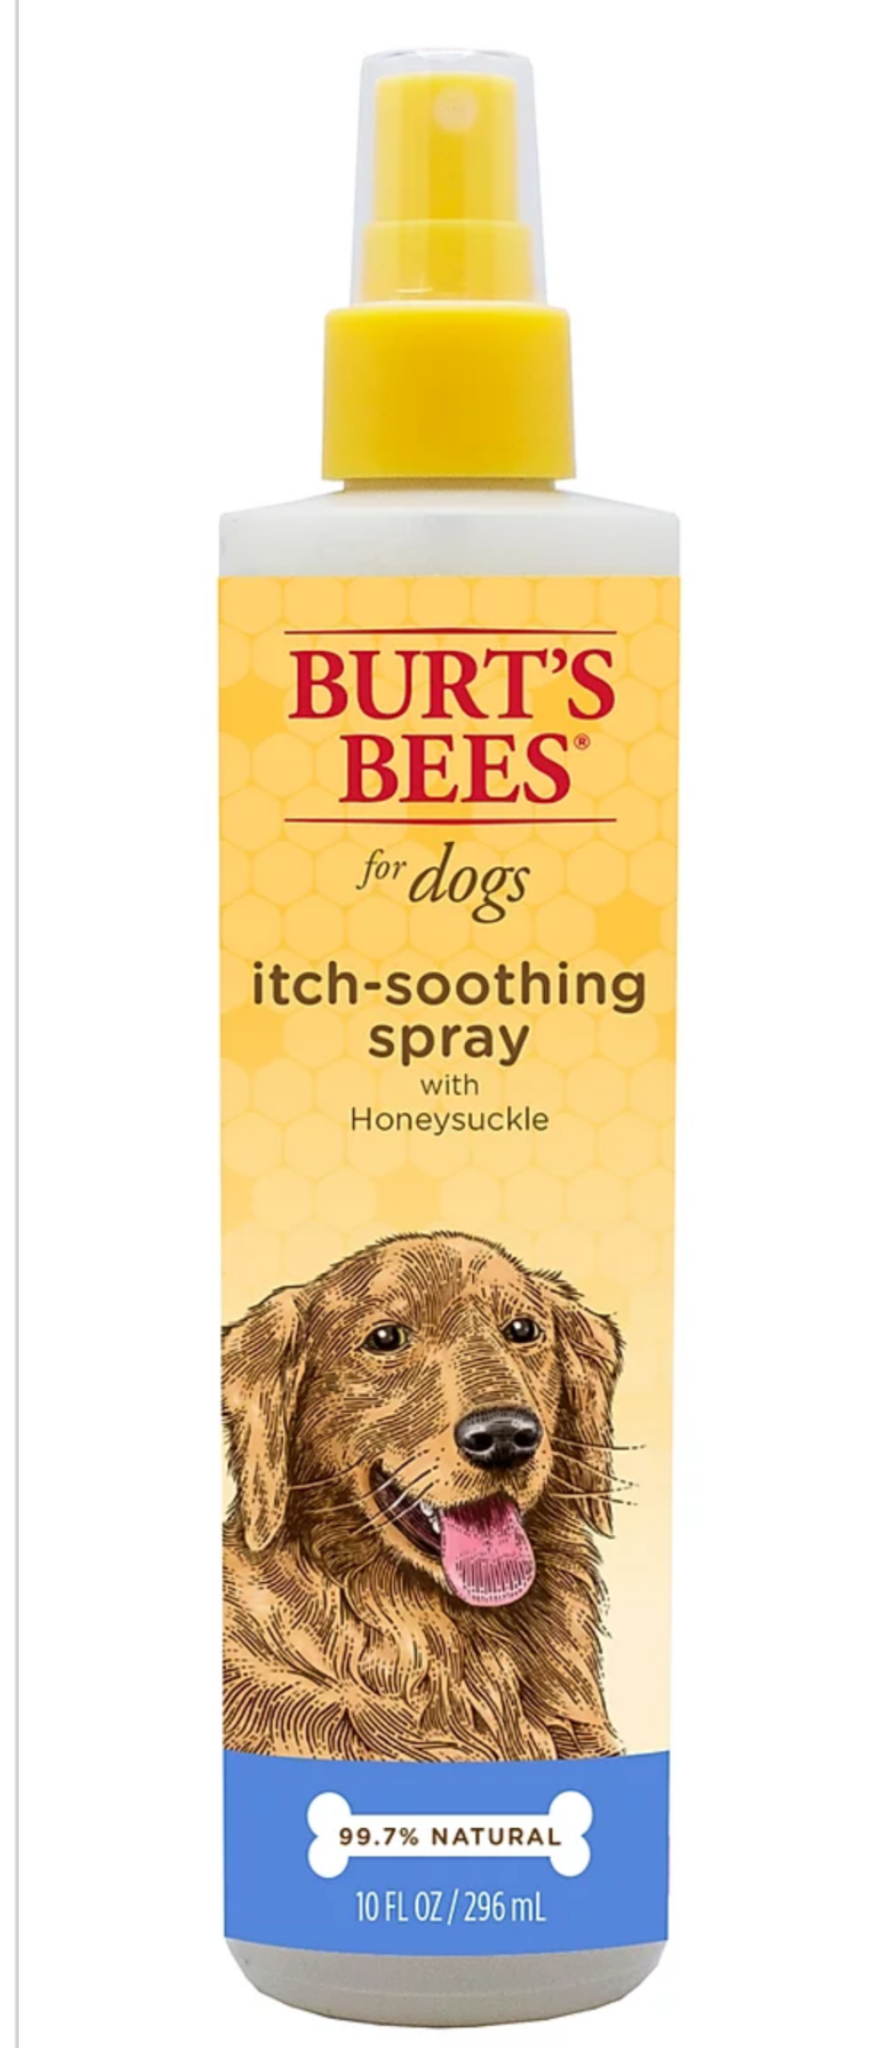 Burt's Bees Itch Soothing Spray
With Honeysuckle